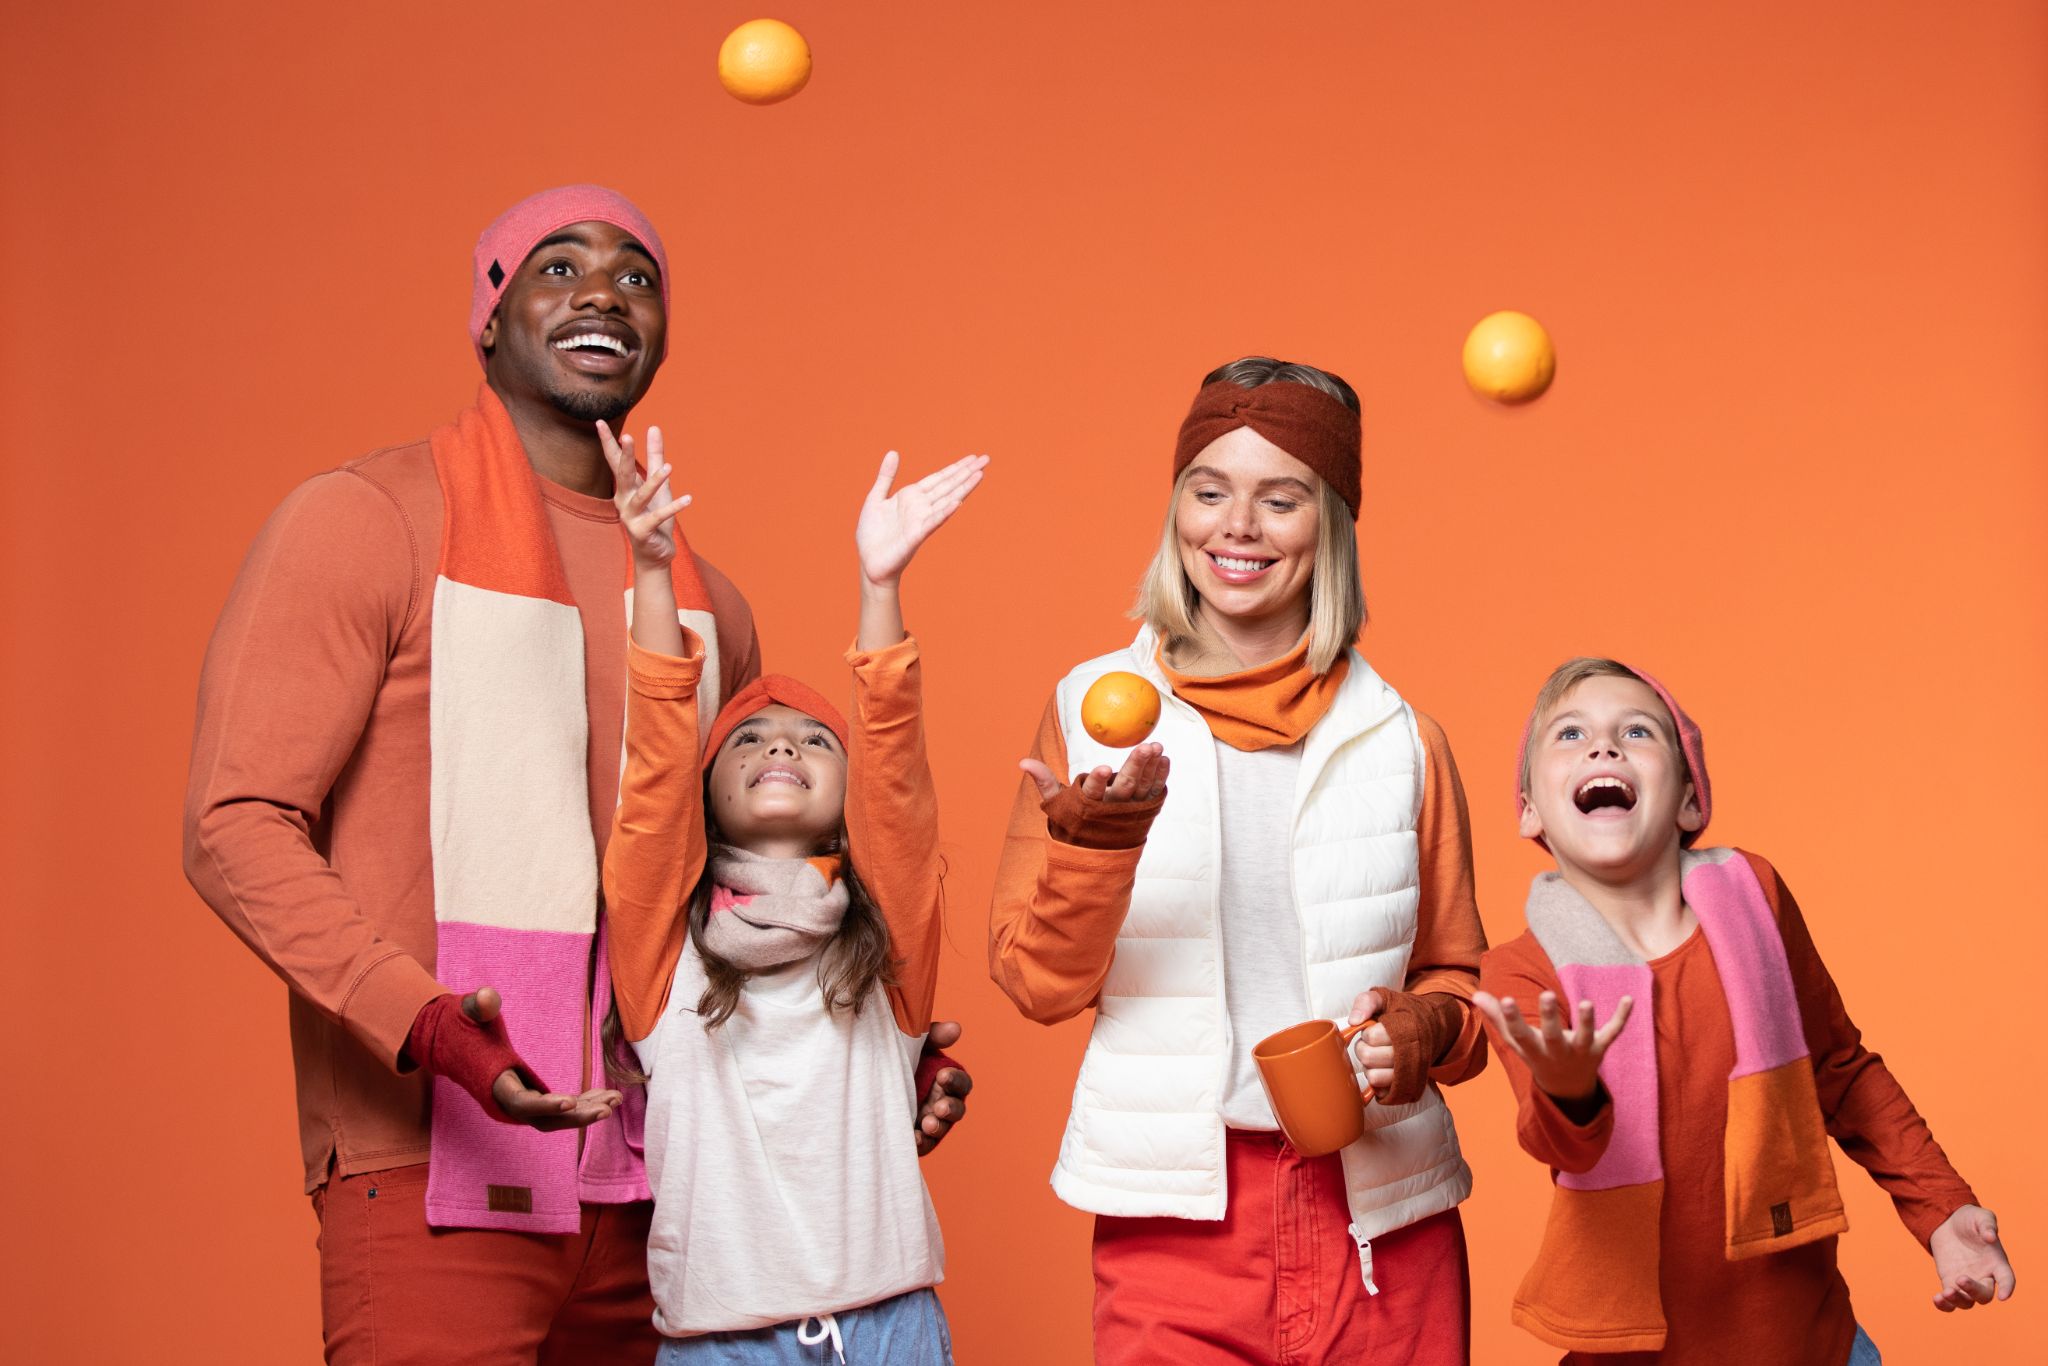 An African American male and a Caucasian woman are juggling oranges with two children against an orange backdrop. They are primarily wearing orange clothing as well.